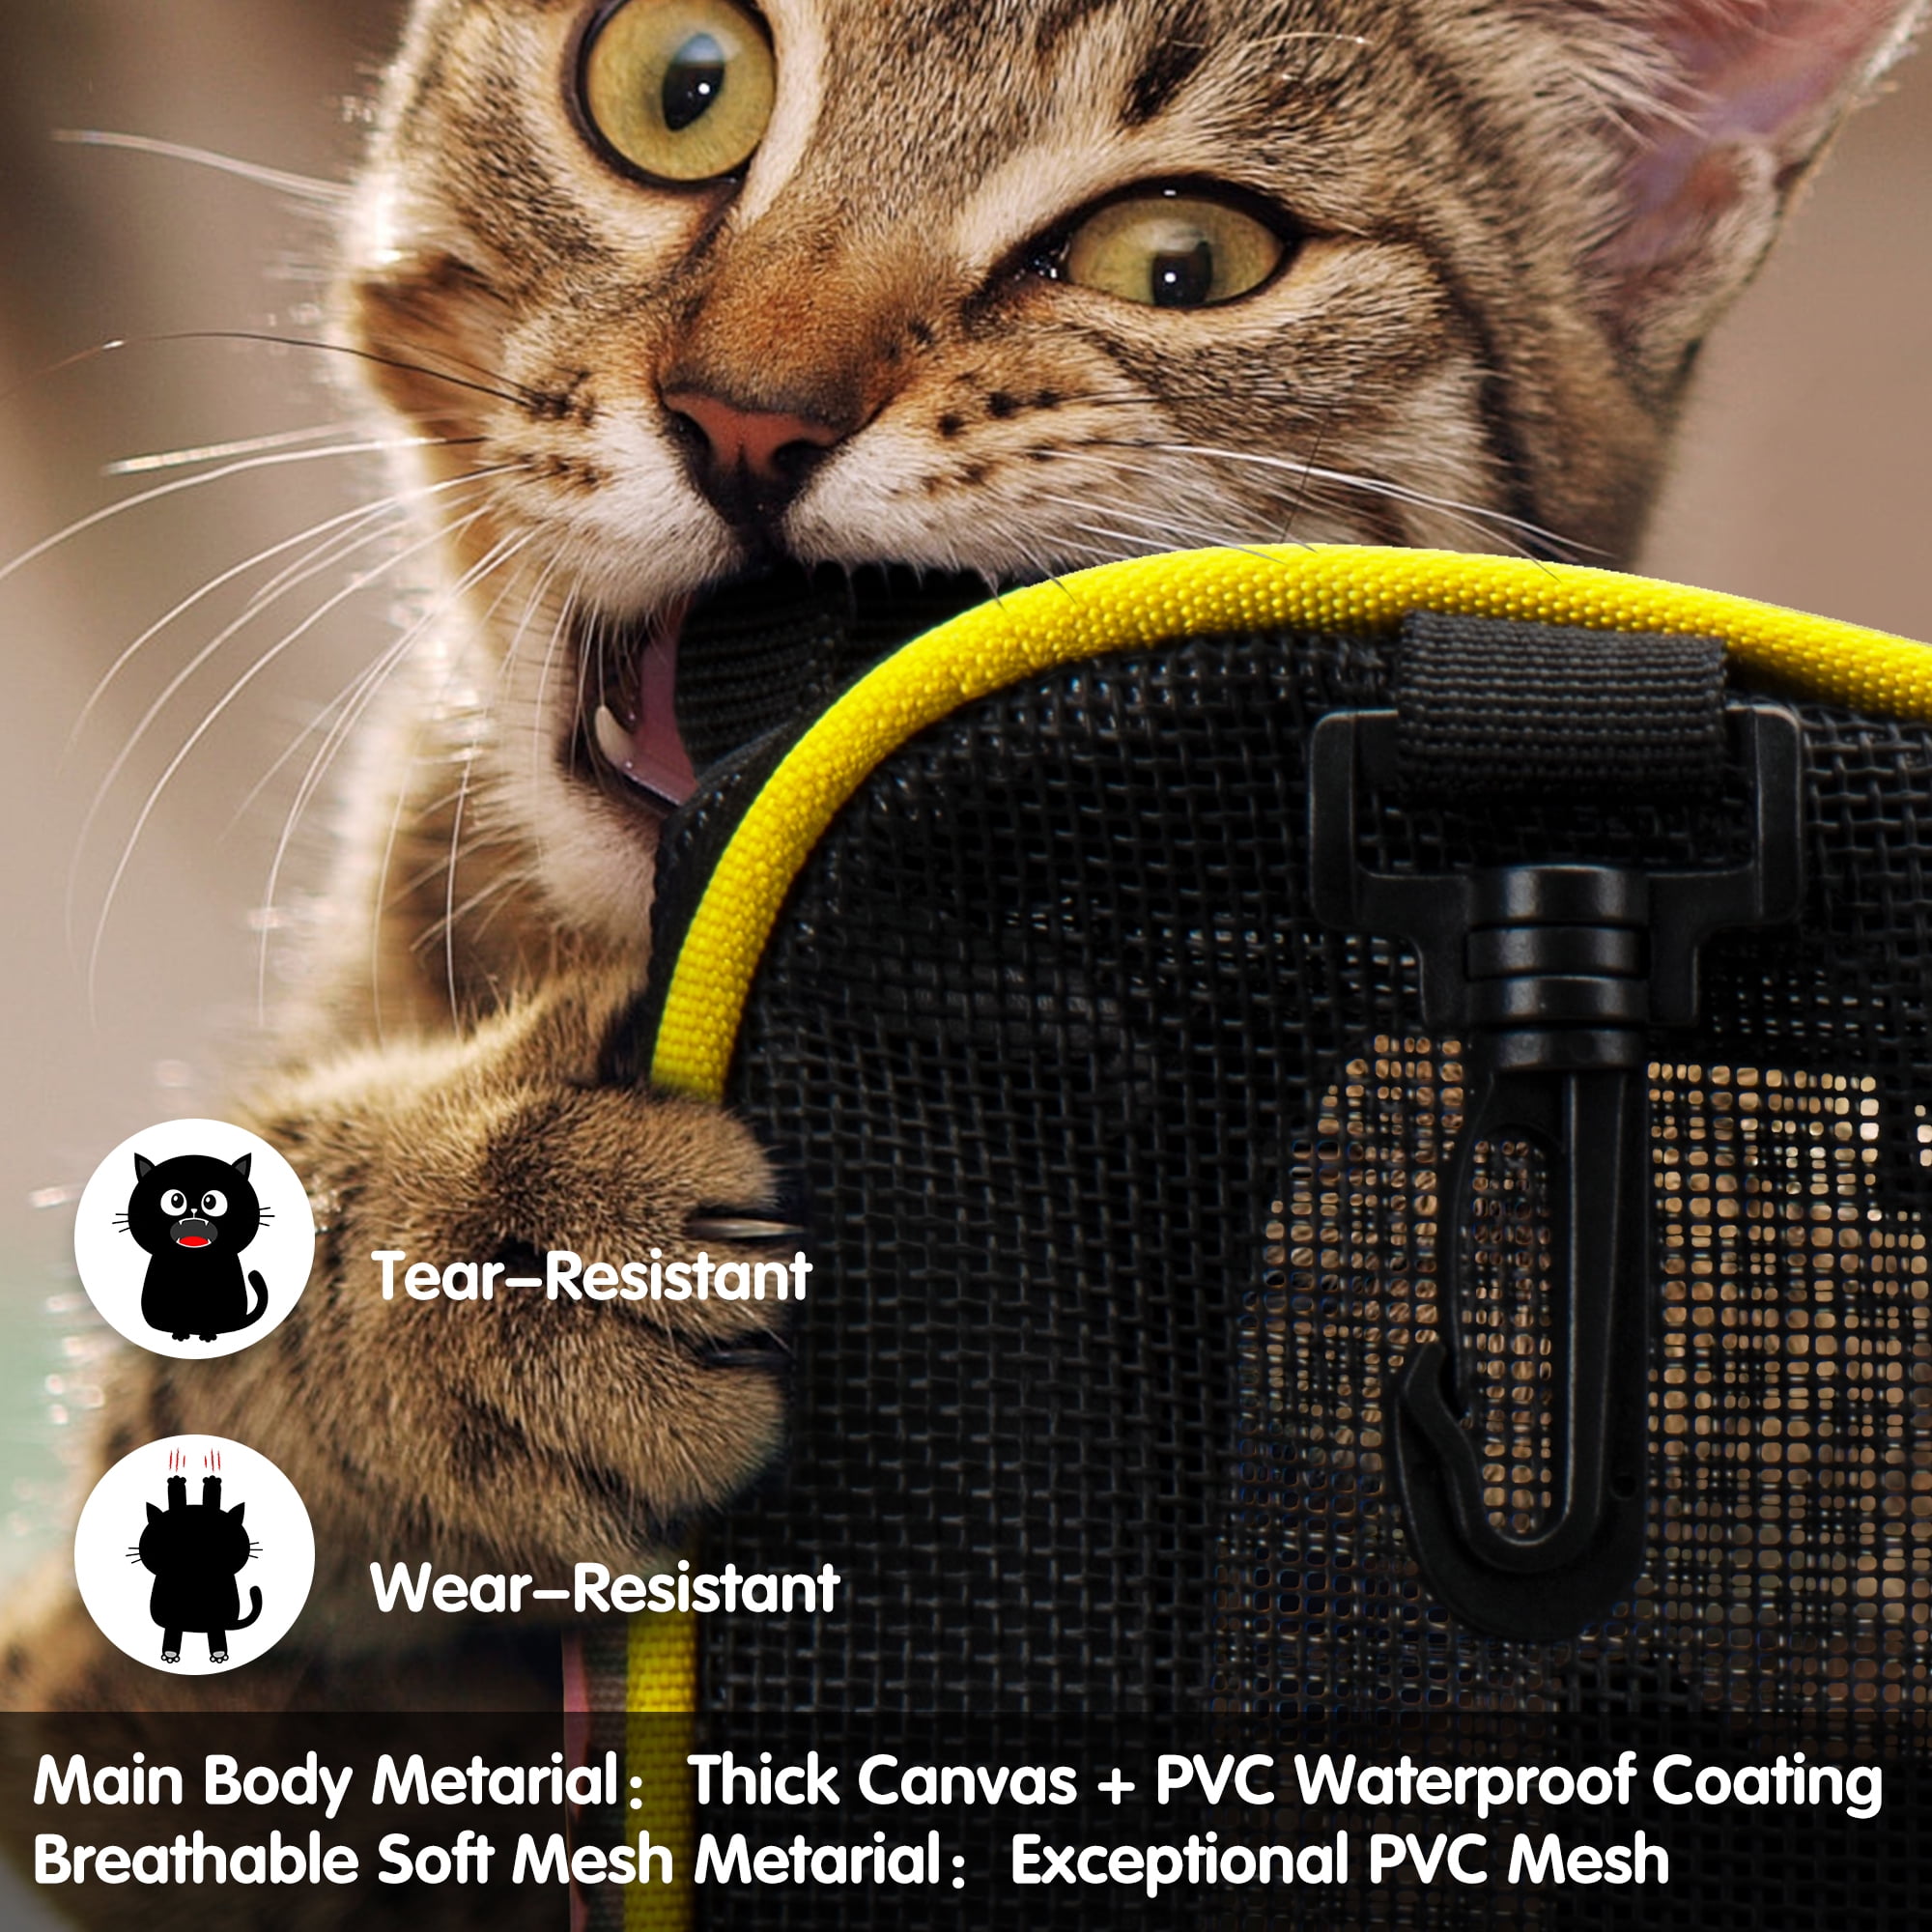 Large expandable cat carrier for travel – Meowgicians™